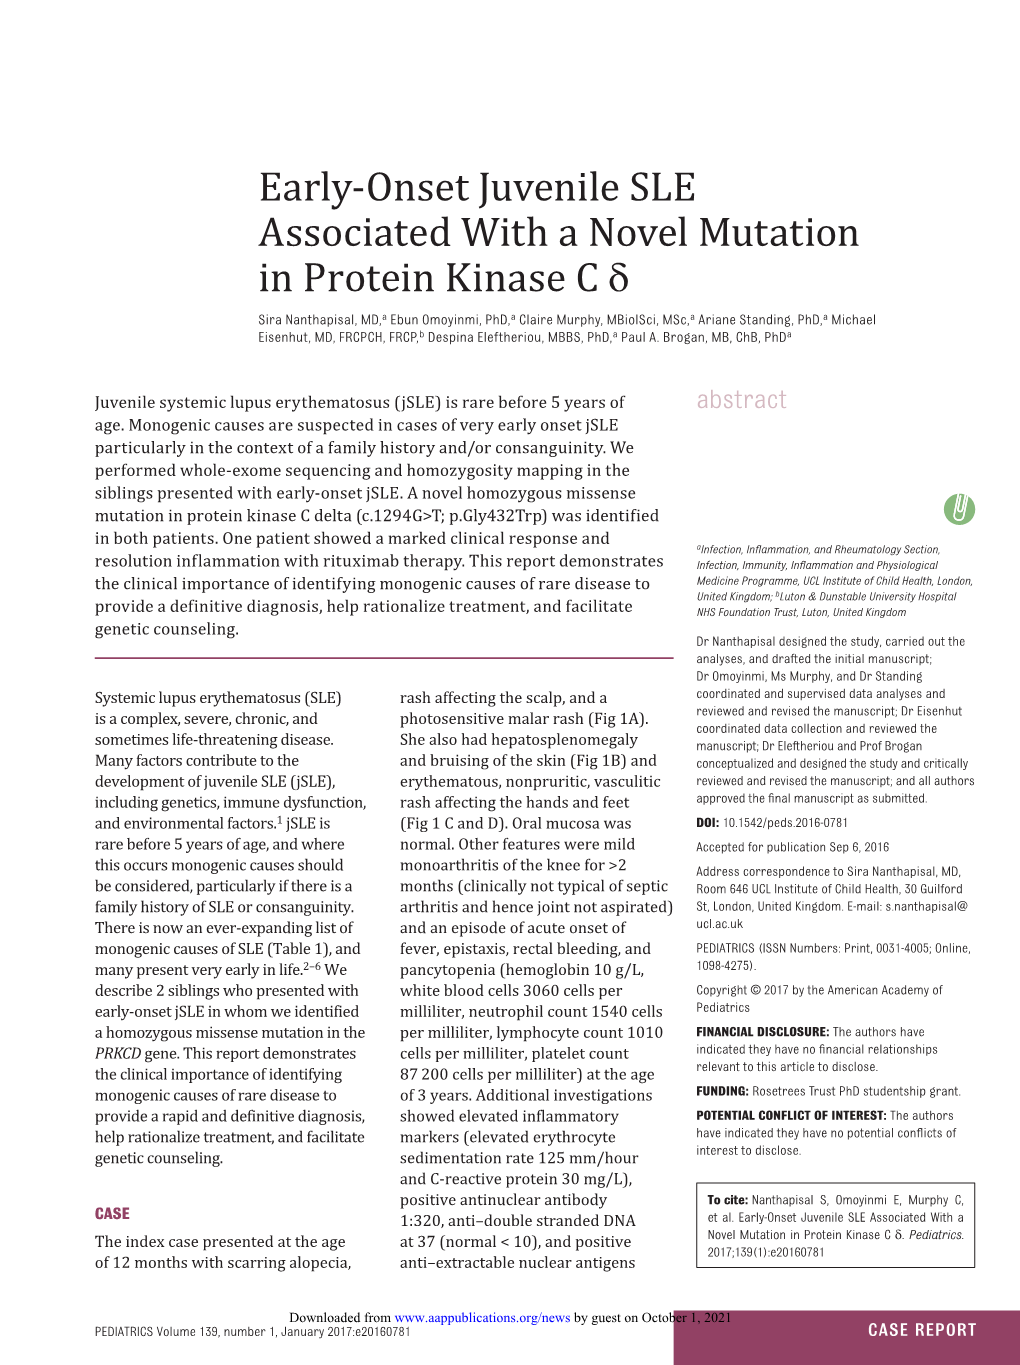 Early-Onset Juvenile SLE Associated with a Novel Mutation in Protein